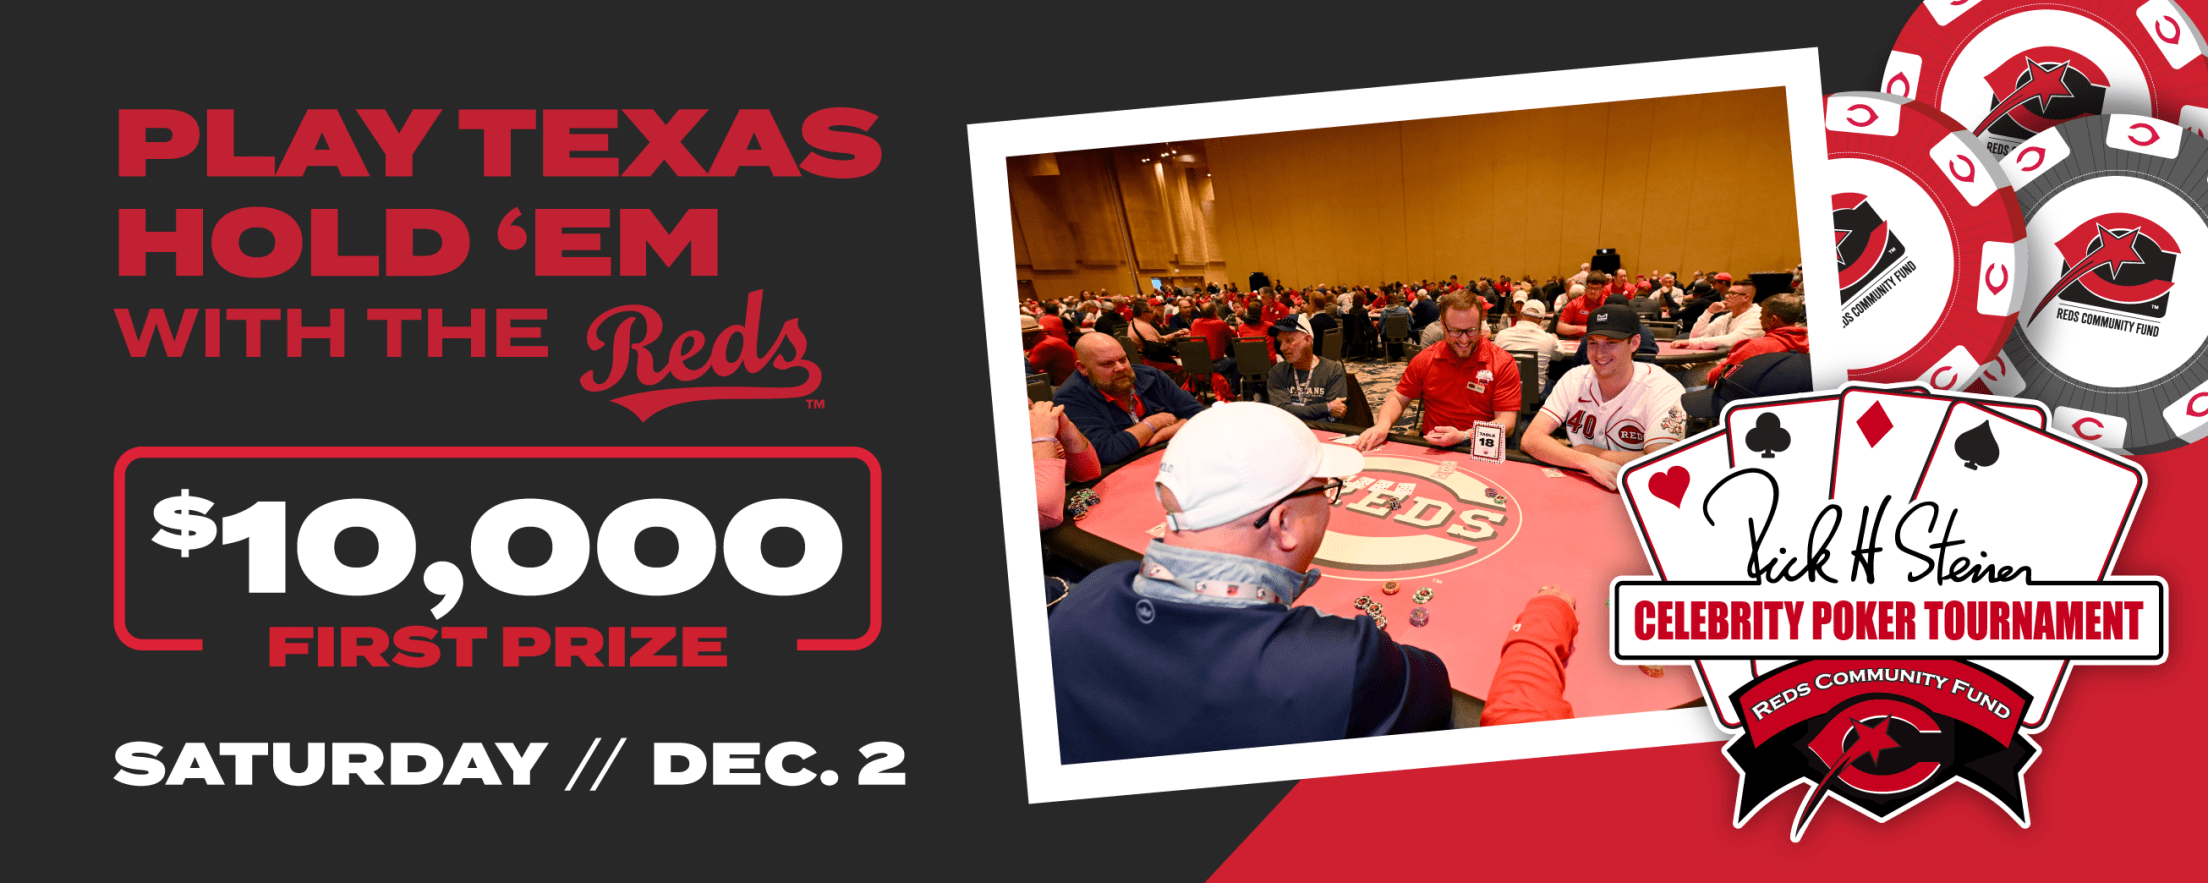 Cincinnati Reds on Twitter: The Reds Community Fund held a